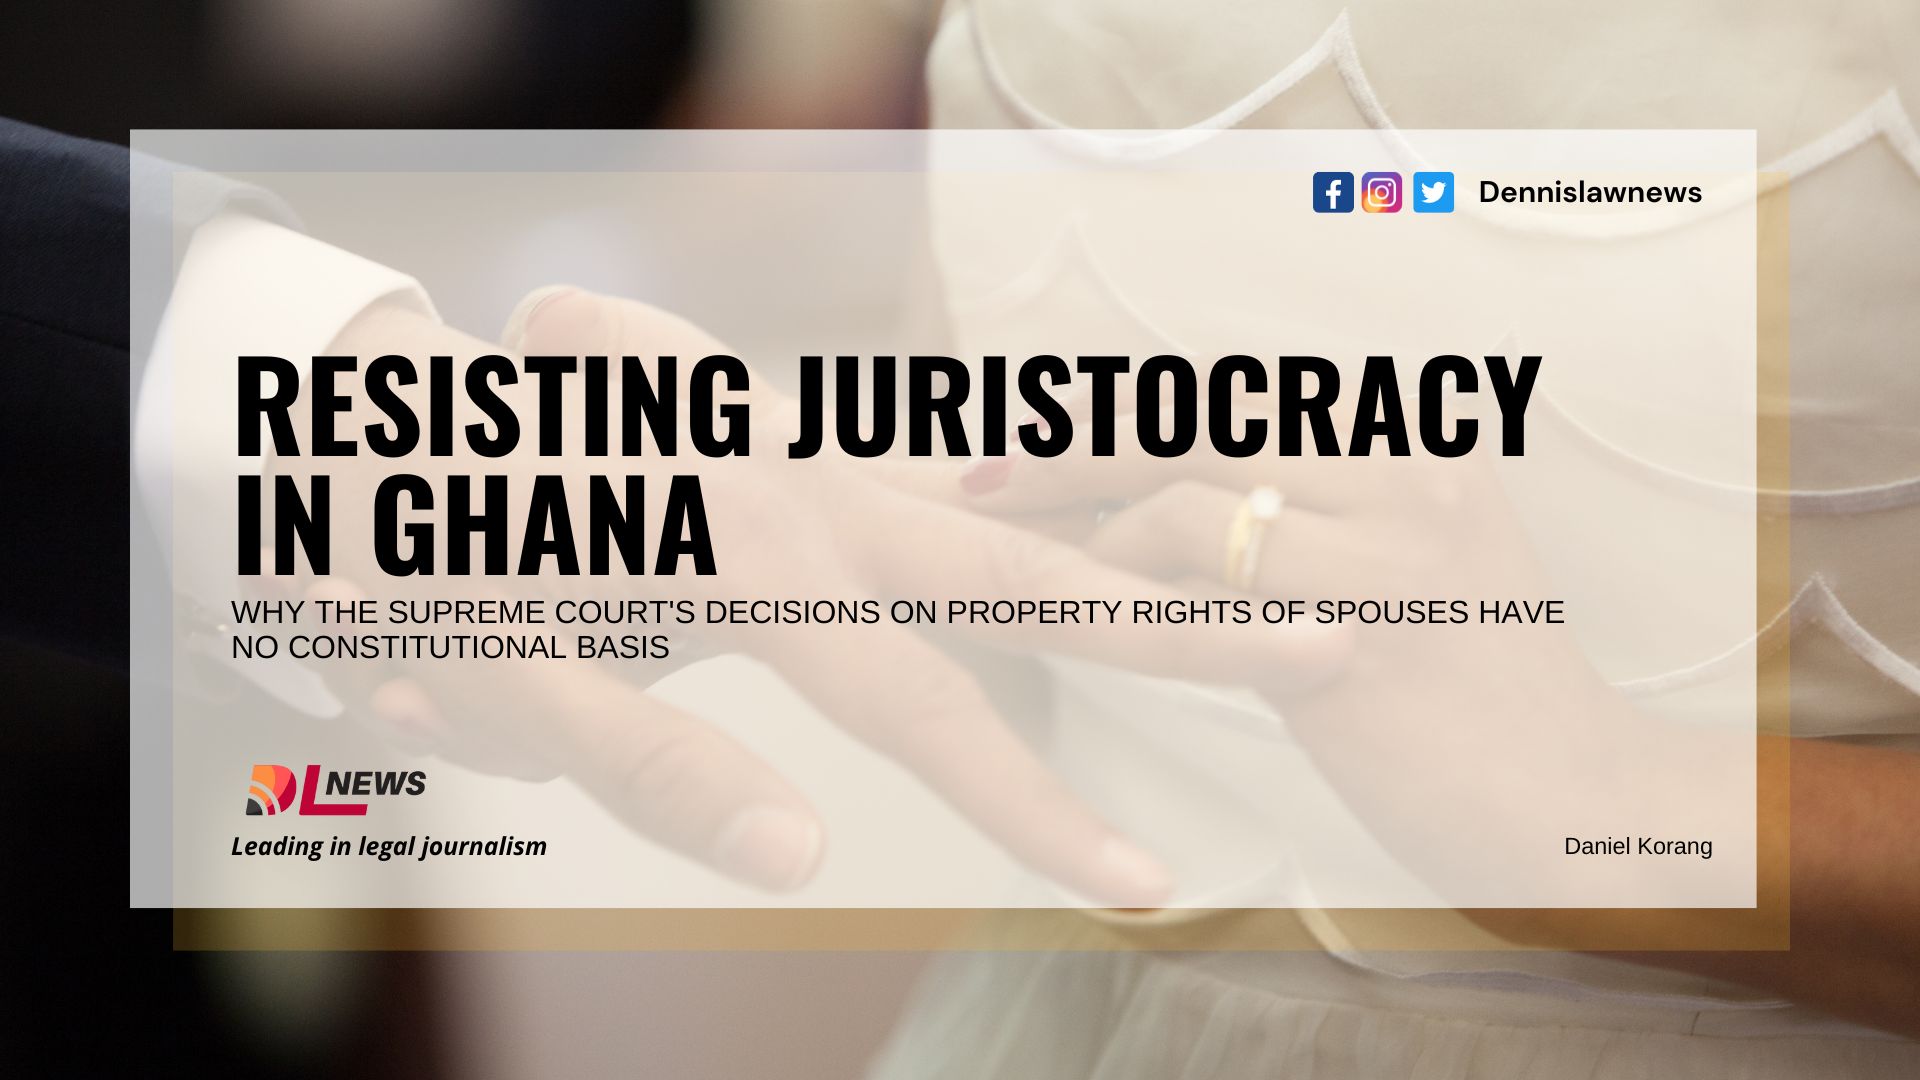 Resisting Juristocracy in Ghana: Why the Supreme Court's decisions on Property Rights of Spouses have no constitutional basis